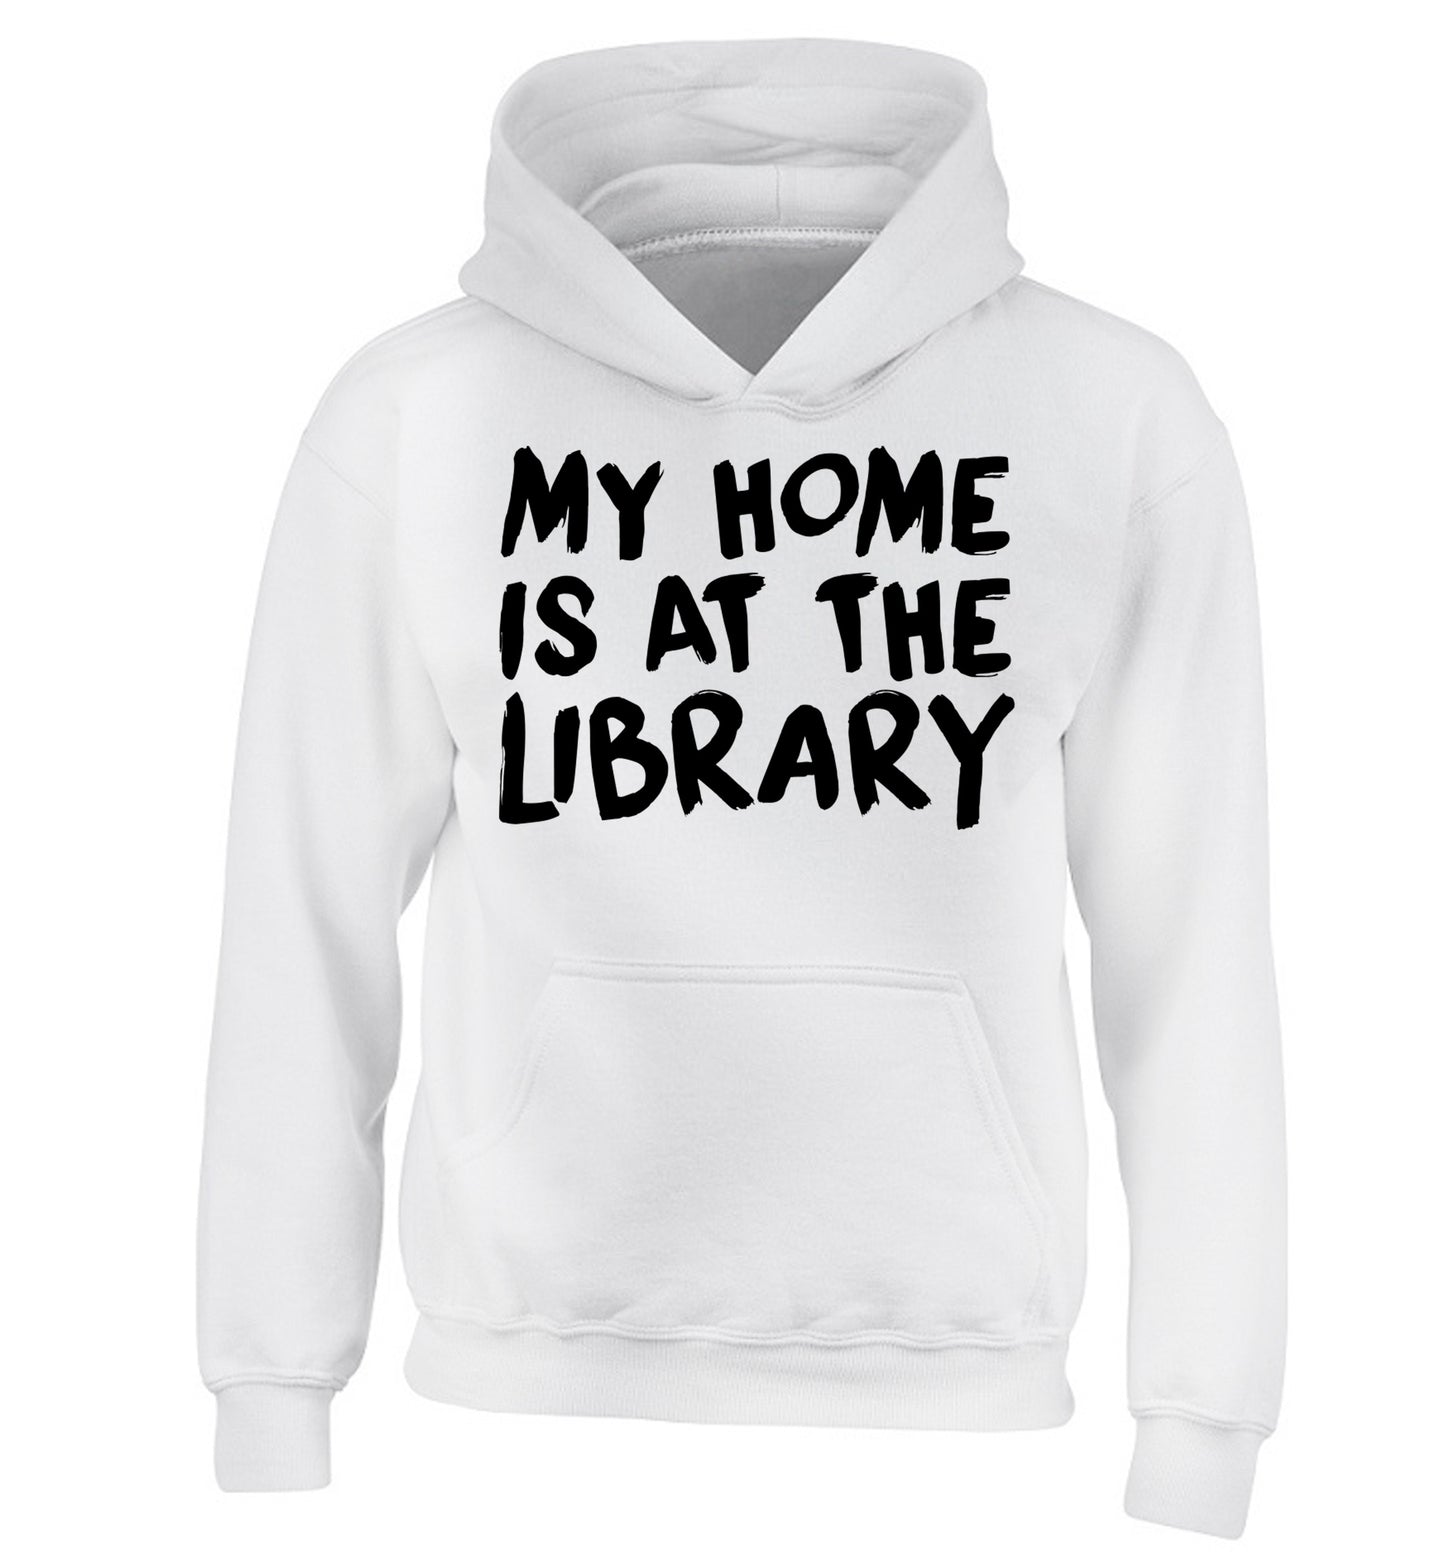 My home is at the library children's white hoodie 12-14 Years